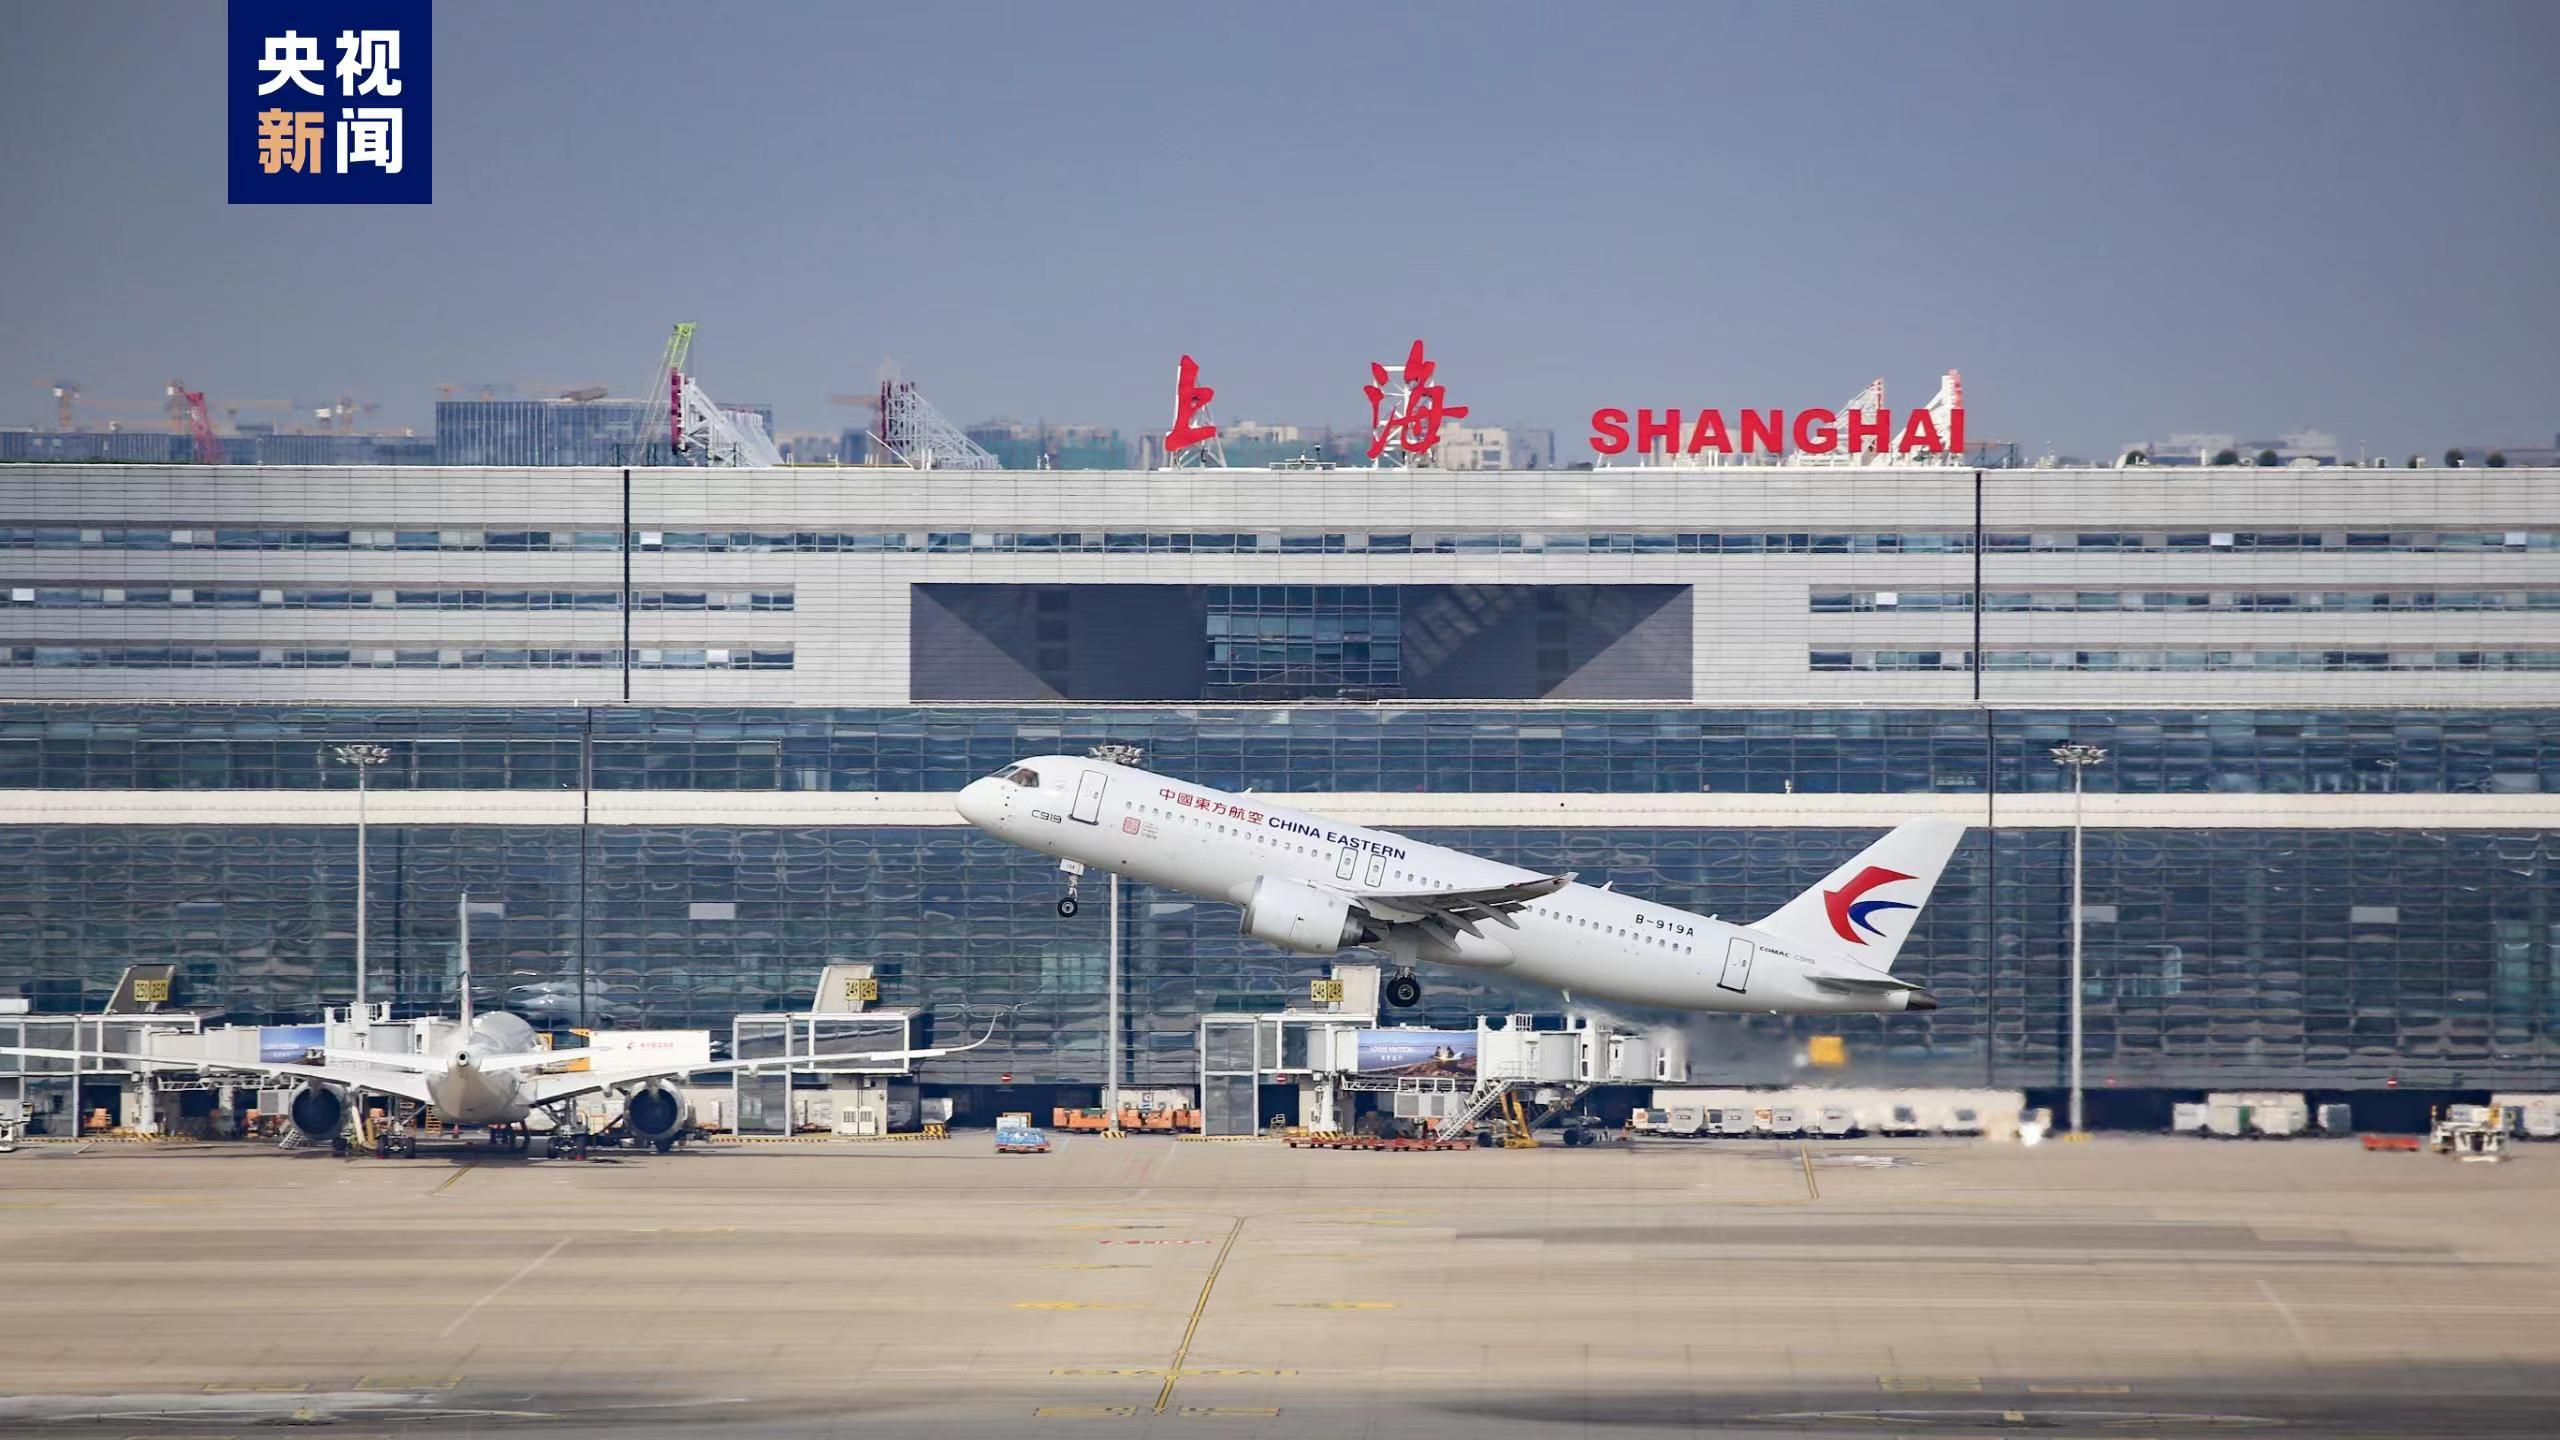 A C919 large passenger aircraft takes off from Shanghai Hongqiao International Airport in east China's Shanghai. /CMG